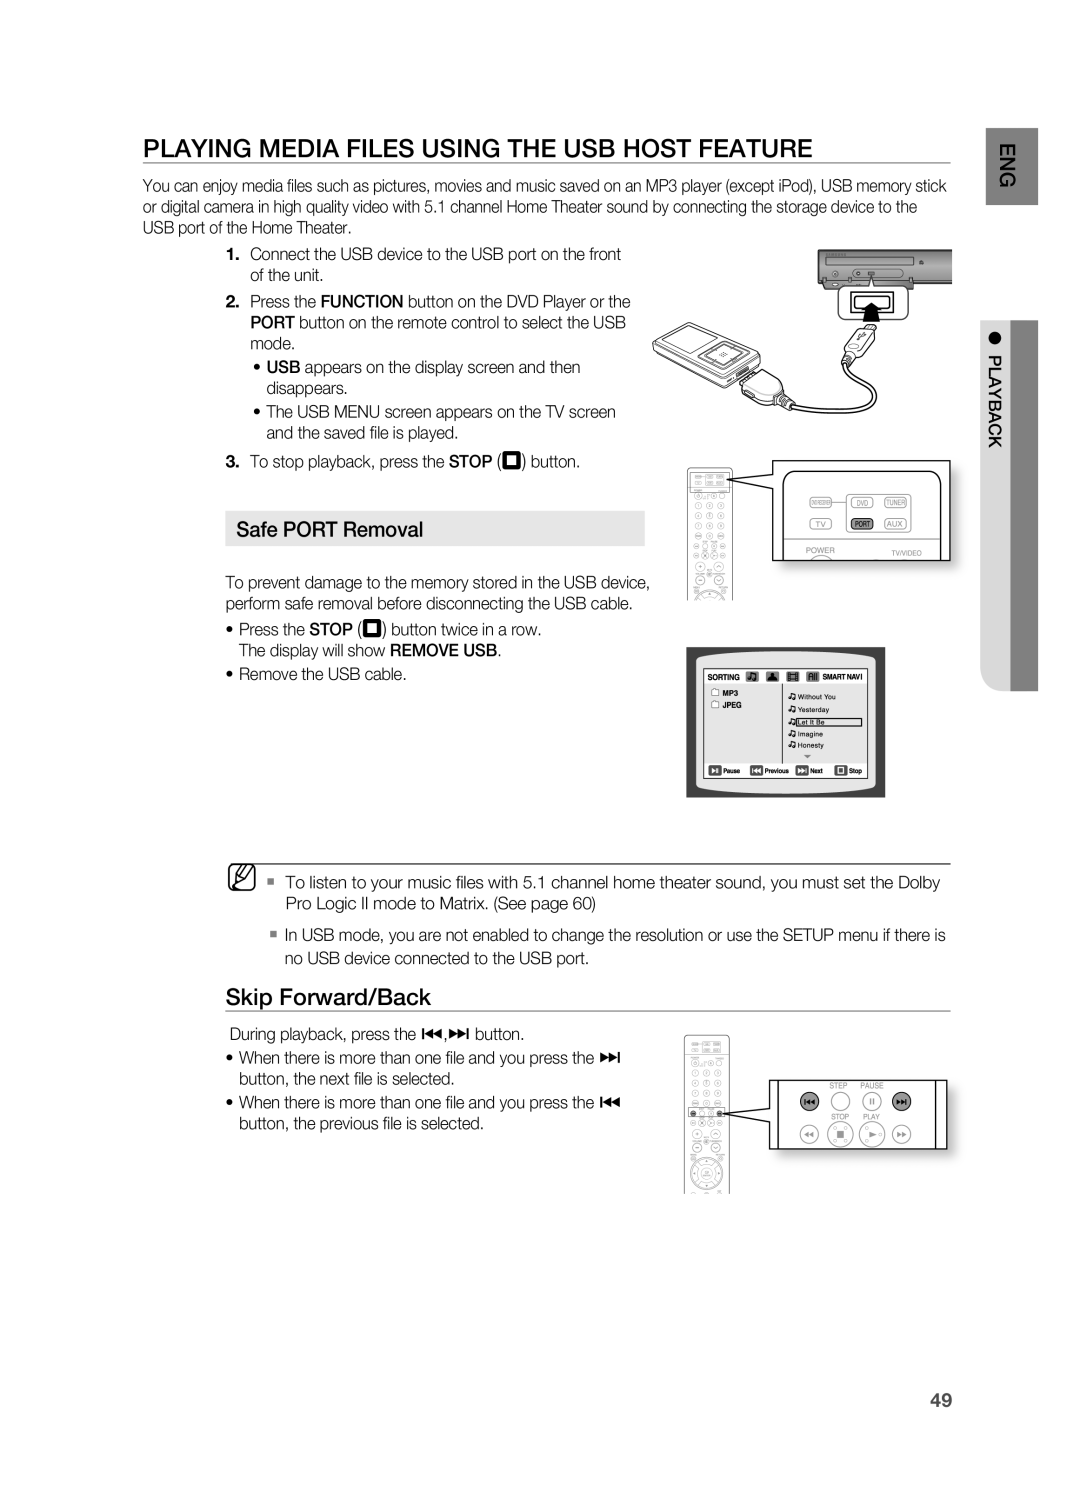 Samsung HT-TWZ315 manual PLAyinG mEDiA fiLES USinG tHE USB HOSt fEAtUrE, Safe POrt removal, Skip forward/Back 